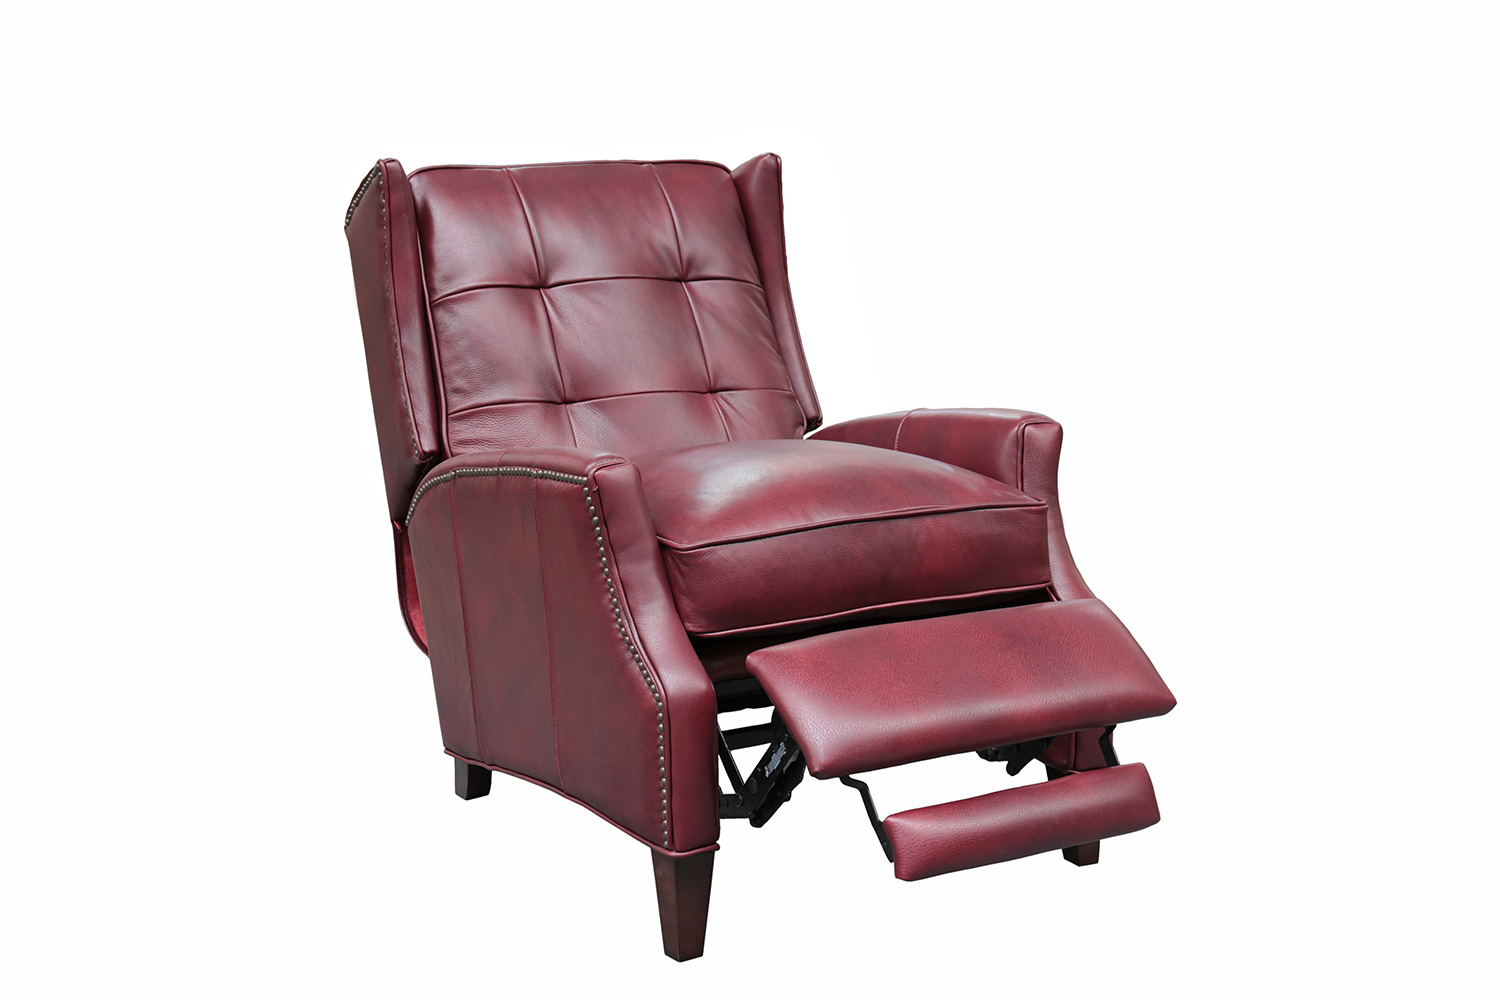 Barcalounger Lincoln Recliner Chair - Wenlock Carmine/All Leather